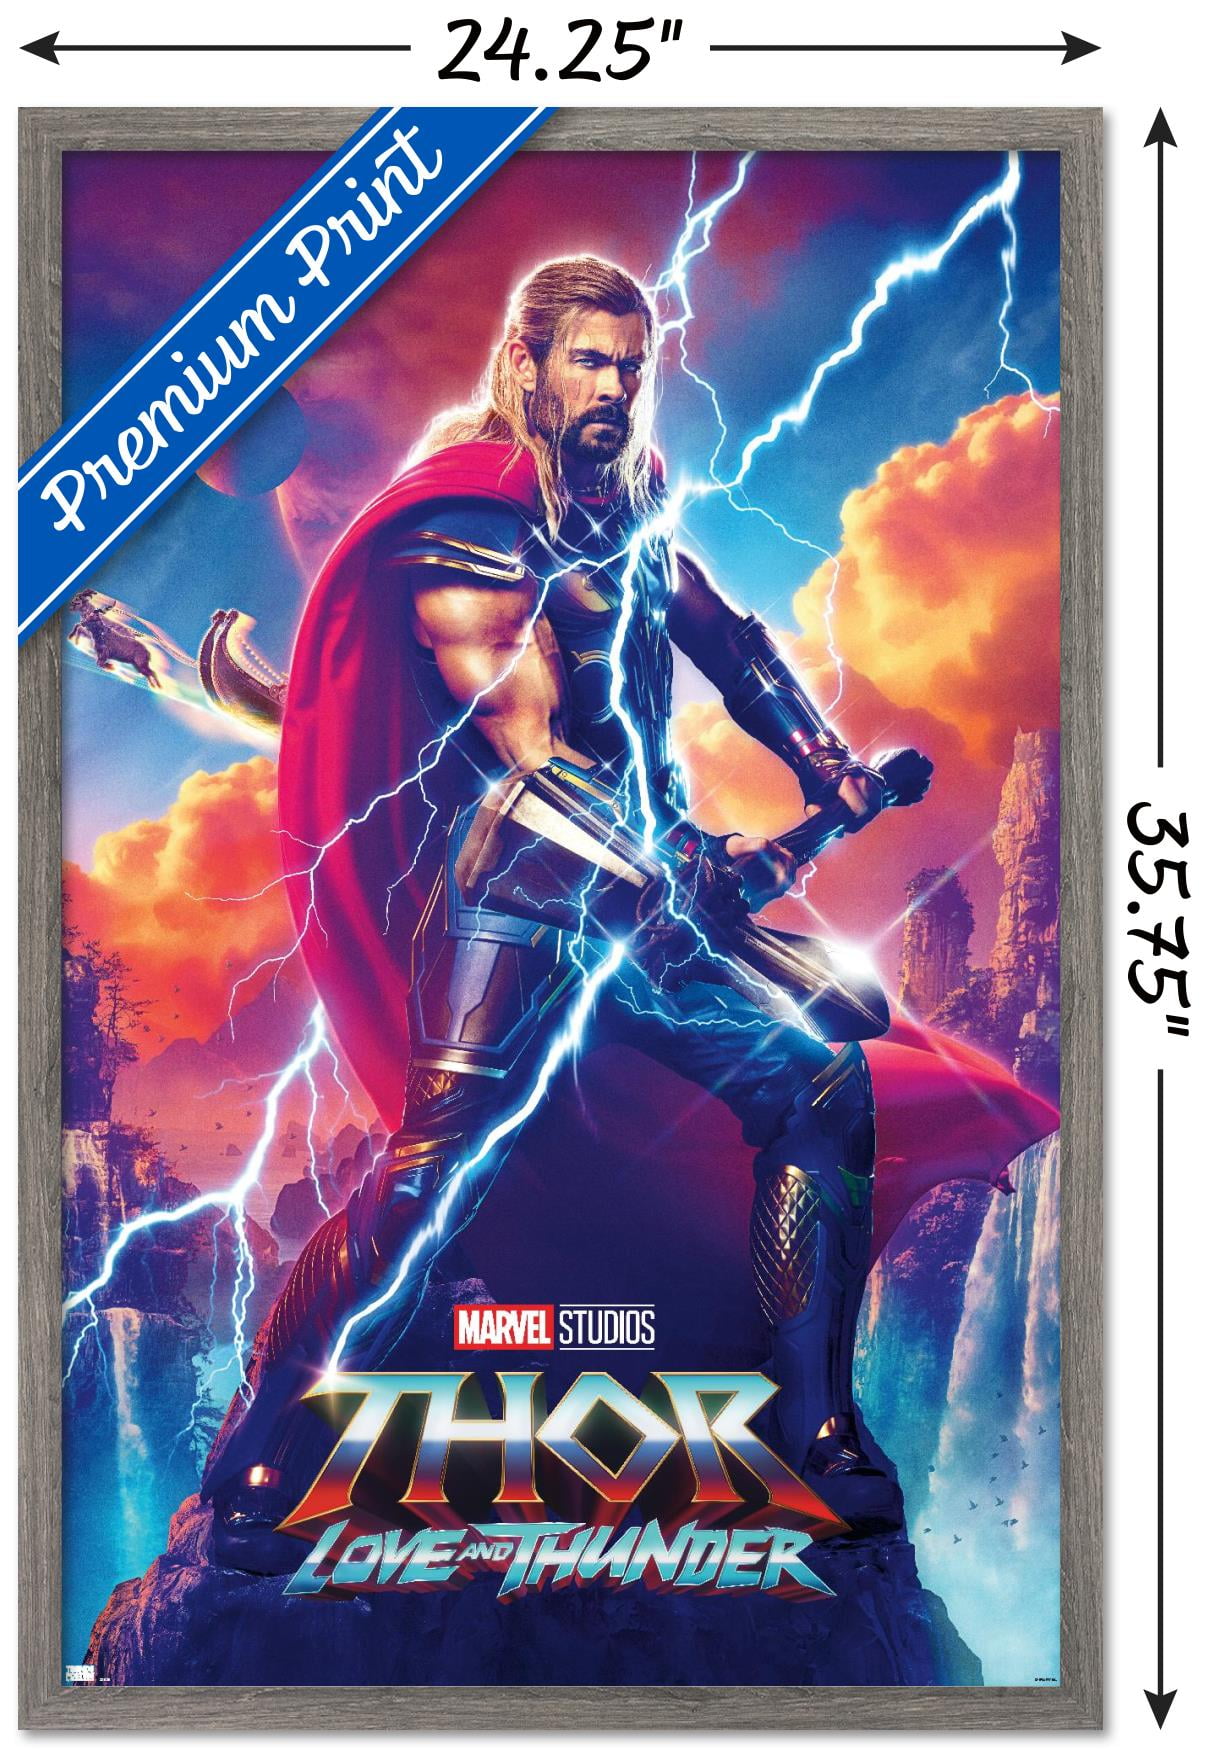 Marvel Thor Love and Thunder Movie Premium POSTER MADE IN USA - CIN108